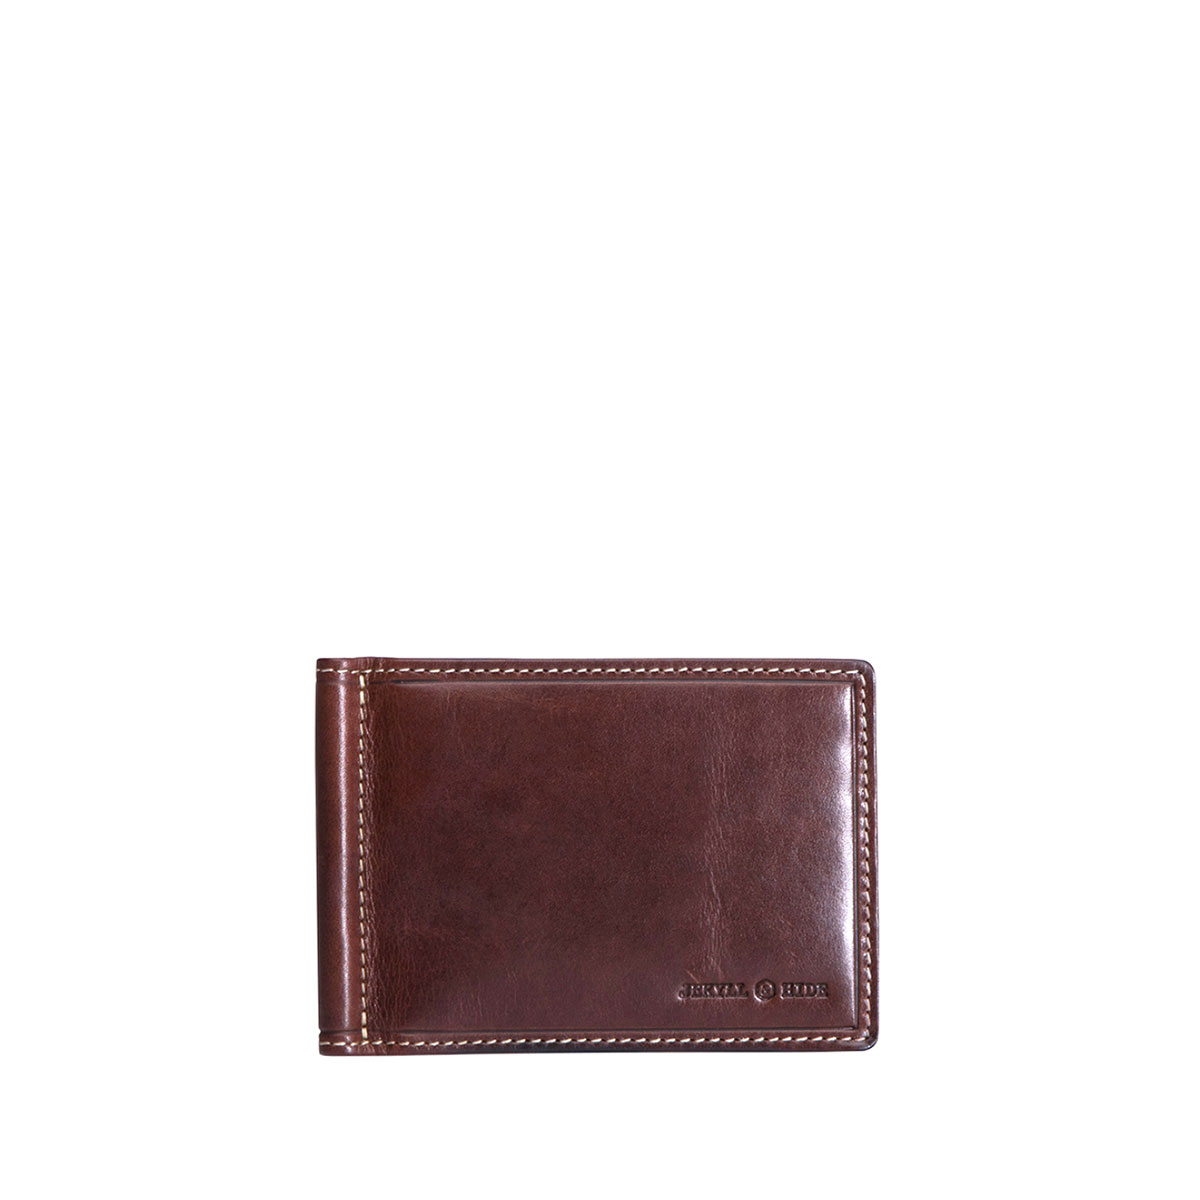 JEKYLL & HIDE TRADITIONAL OXFORD LEATHER MONEY CLIP WALLET ...